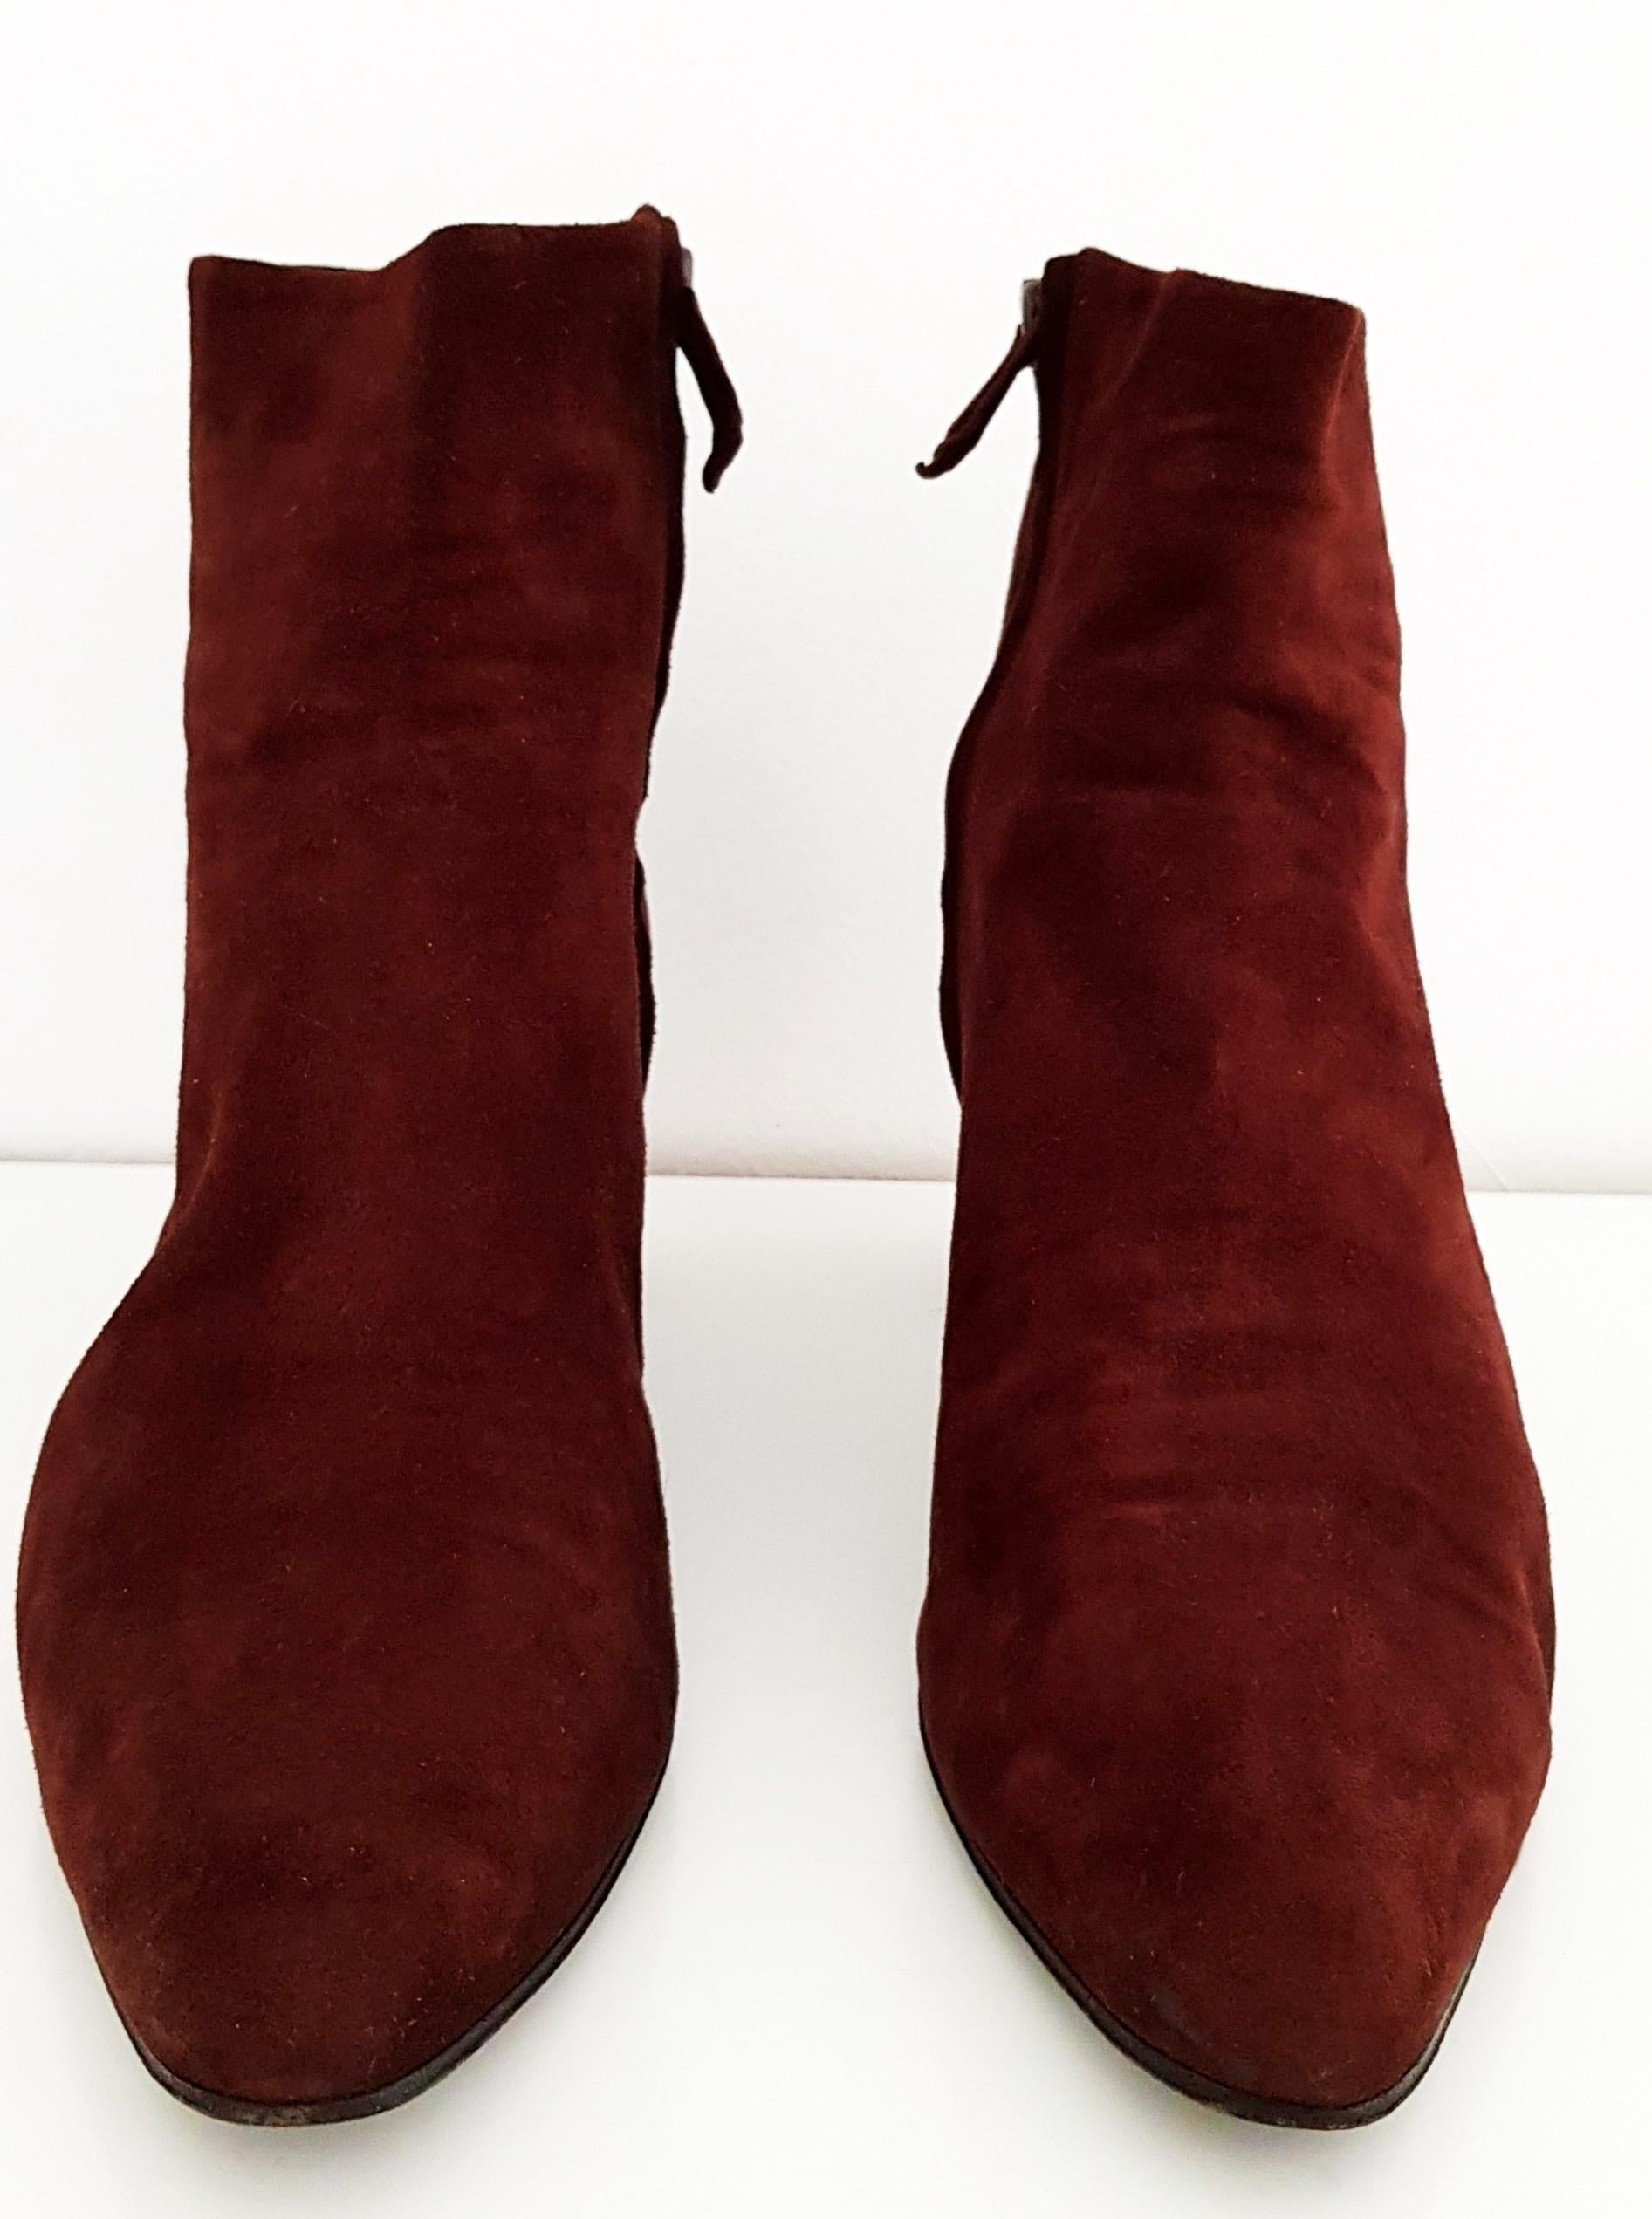 Valentino Couture Brown Suede Zip Ankle Boots - NEW, size 40 (EU) For Sale 1